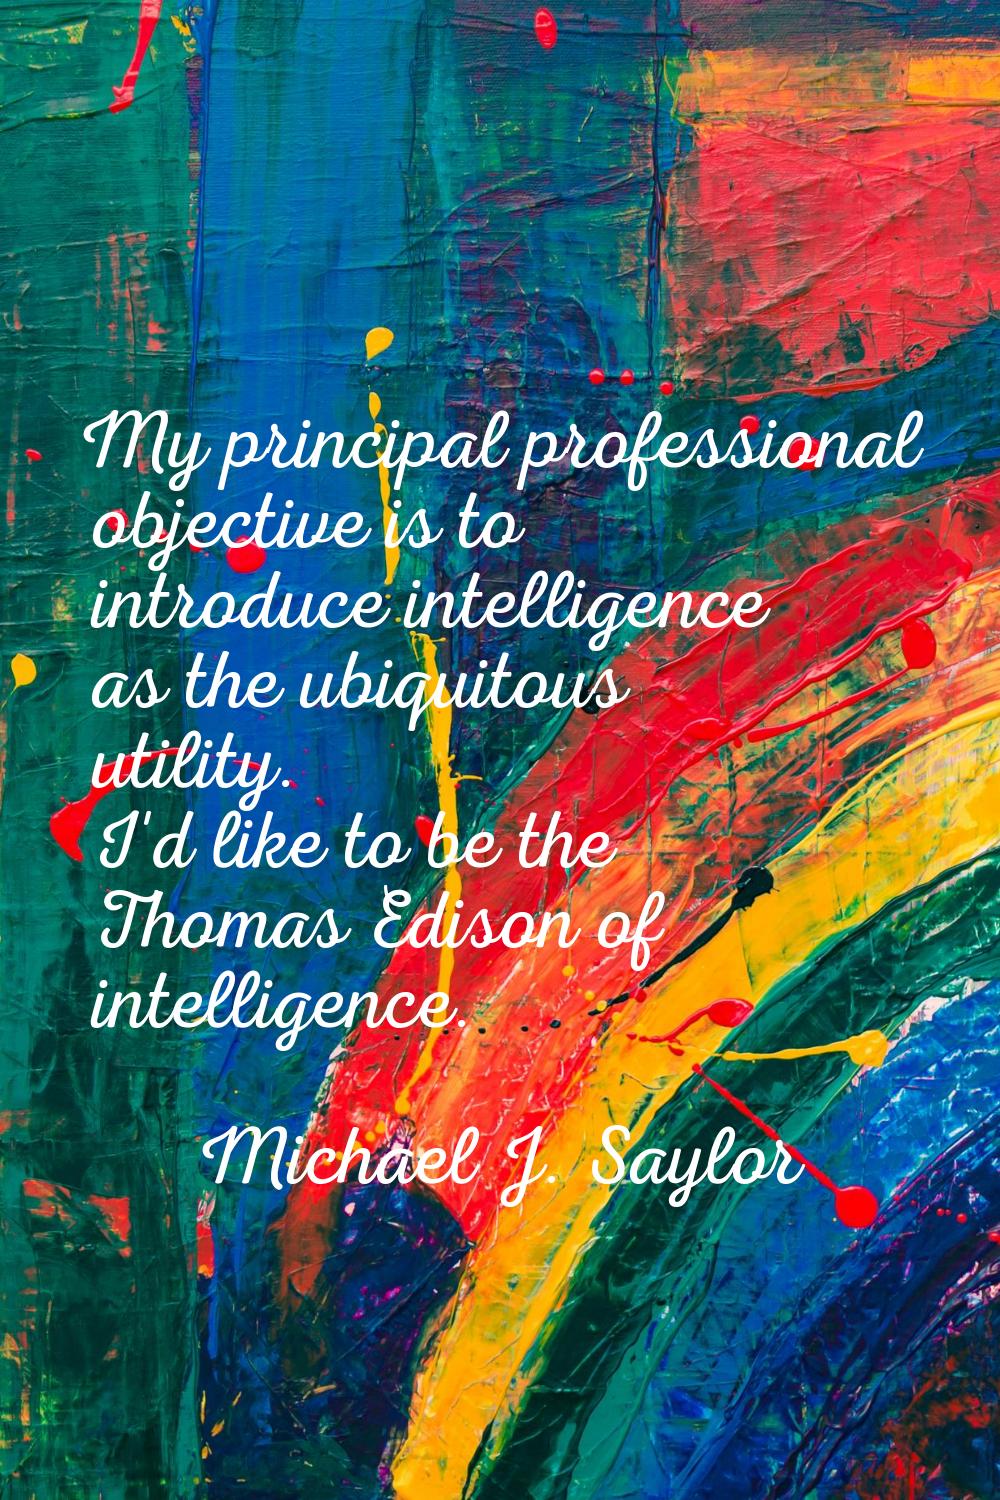 My principal professional objective is to introduce intelligence as the ubiquitous utility. I'd lik